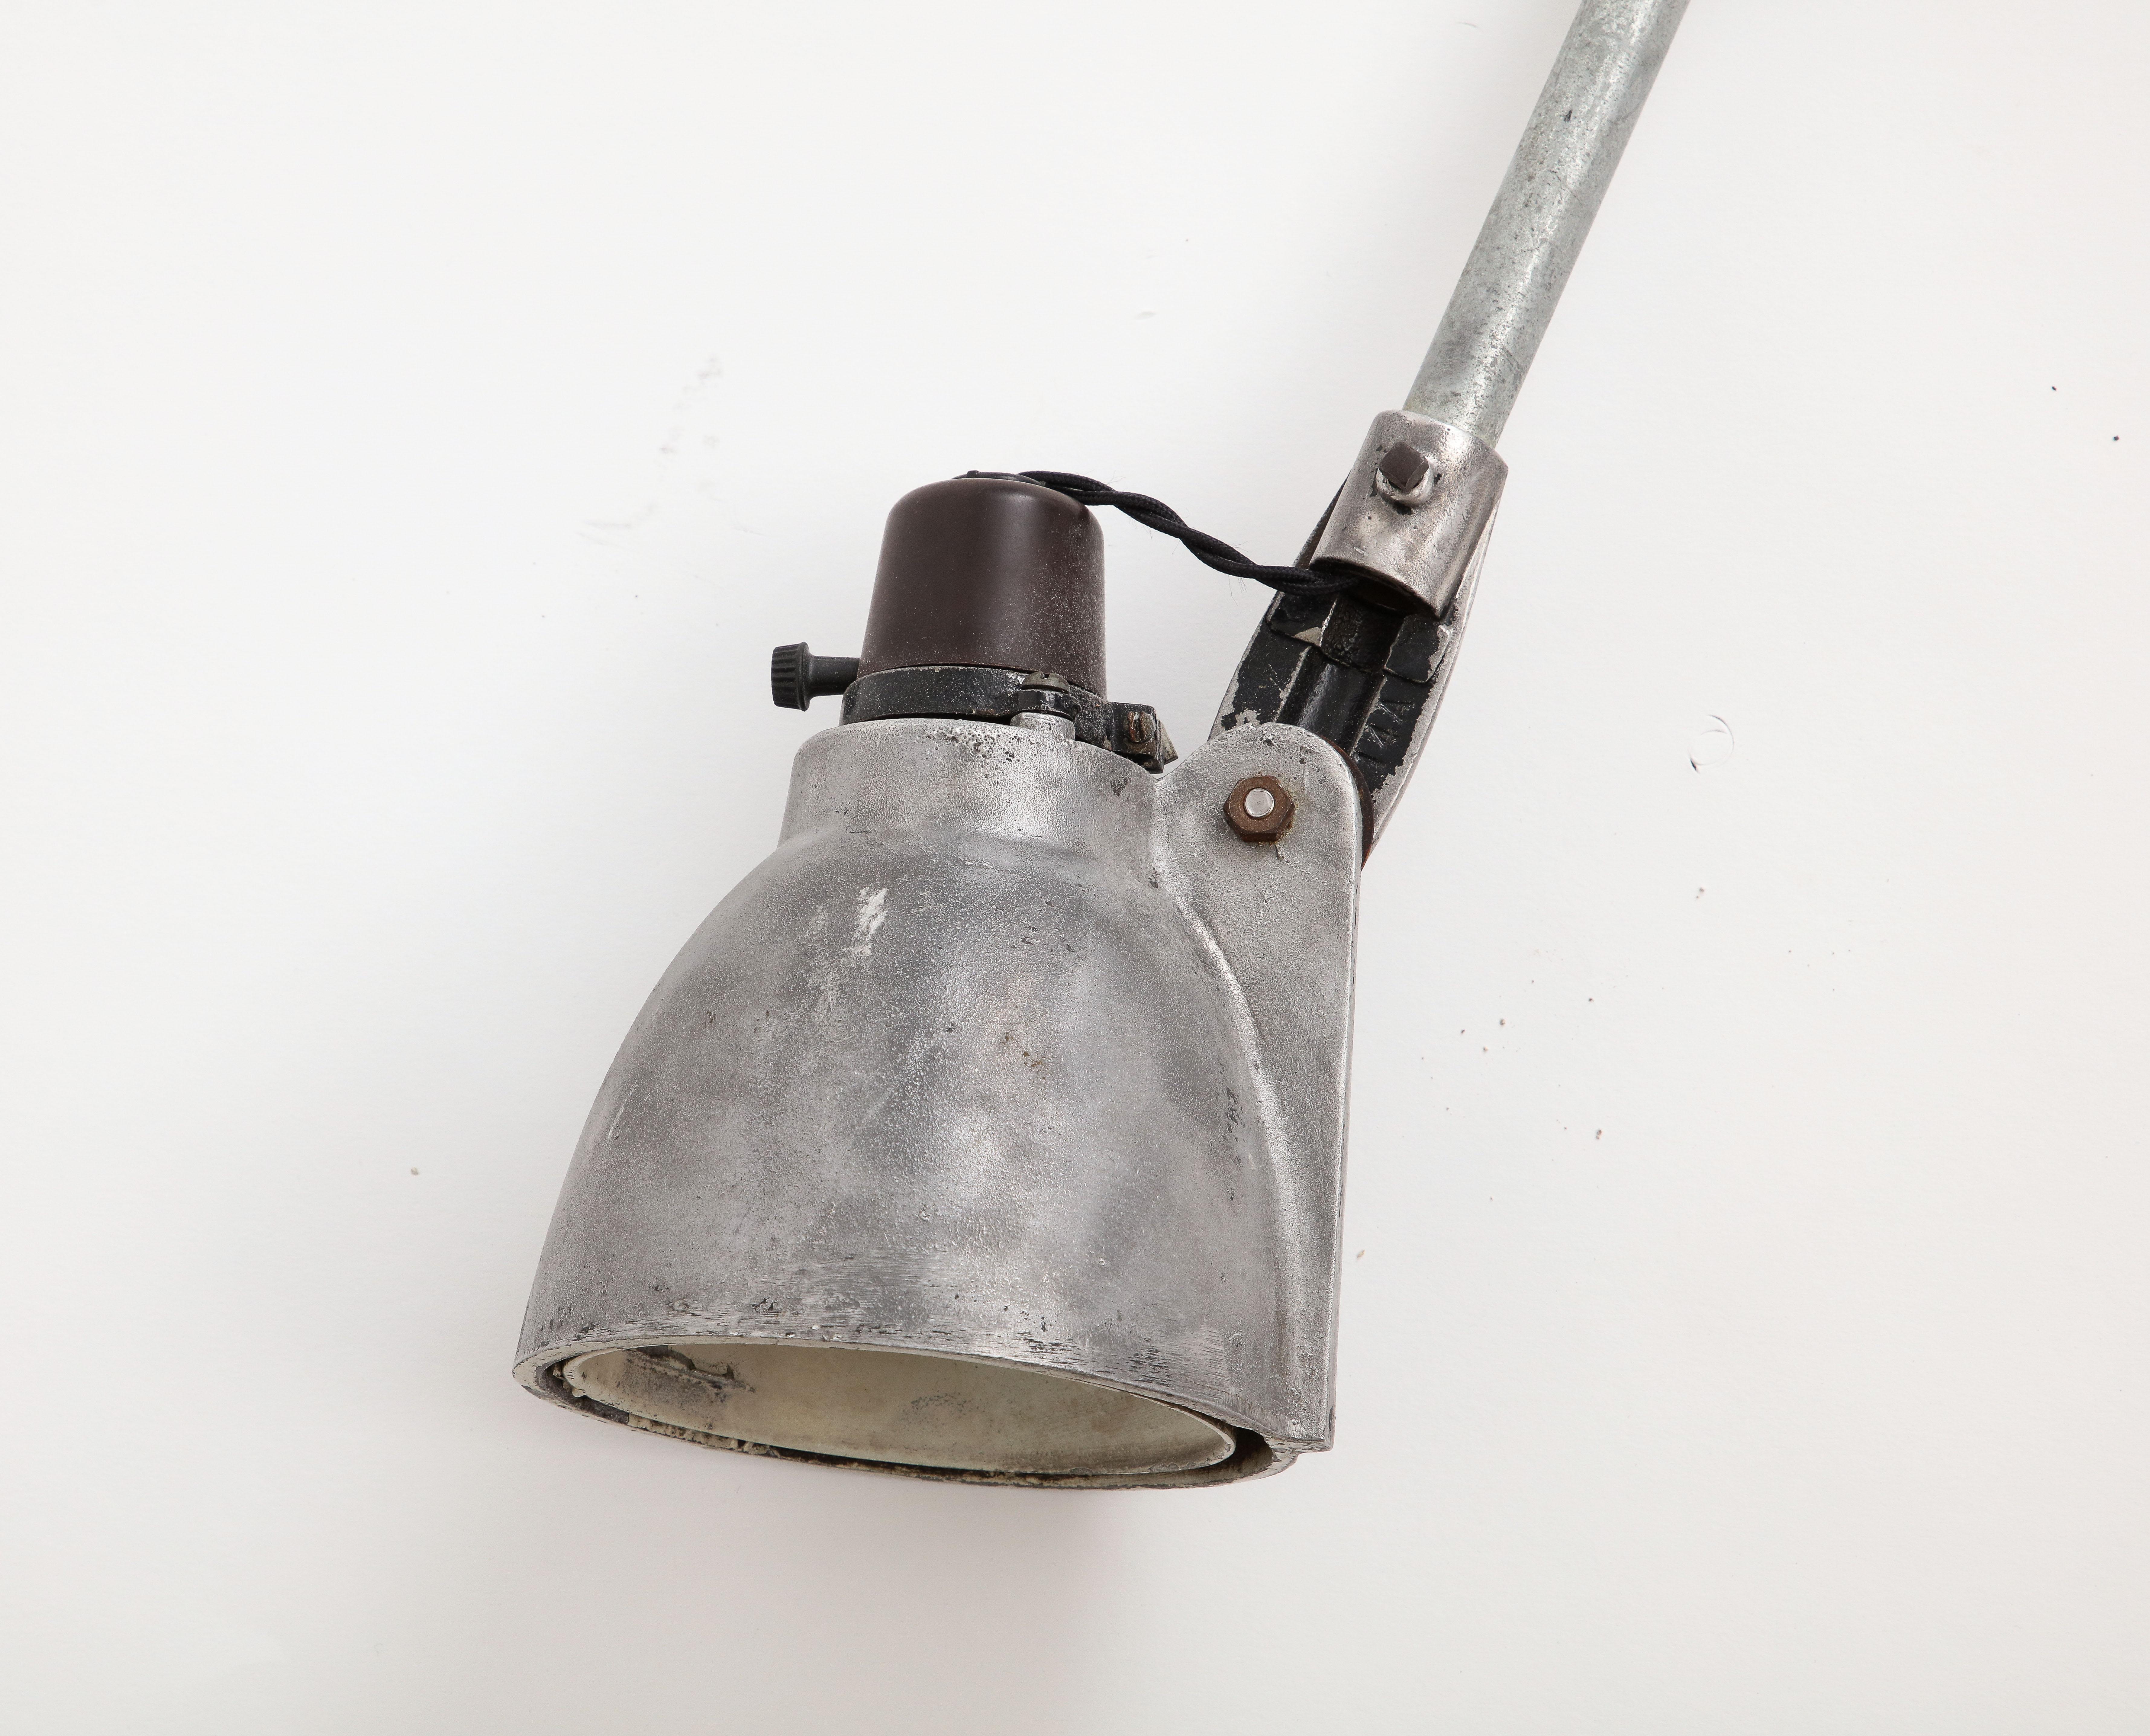 Metal Industrial Anglepoise Wall Mounted Cast Iron Sconce, c. 1940 For Sale